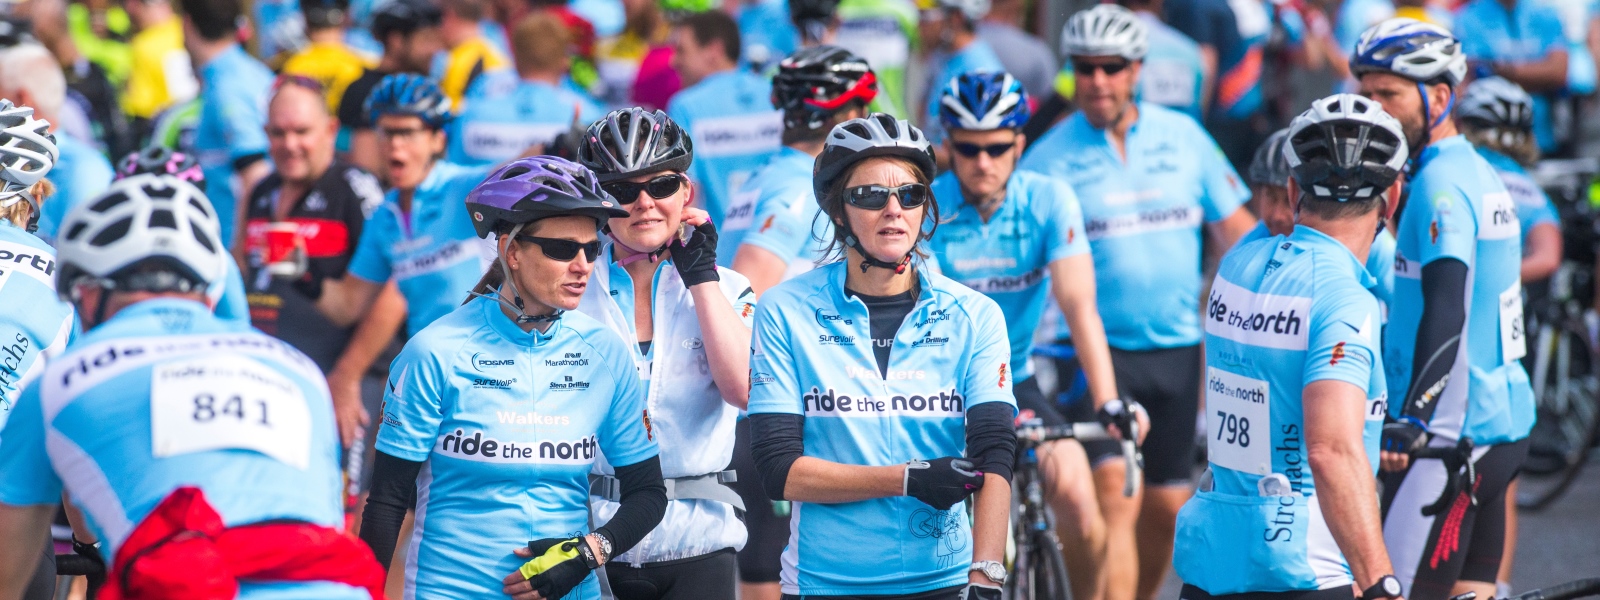 Cyclists taking part in Ride the North 2016